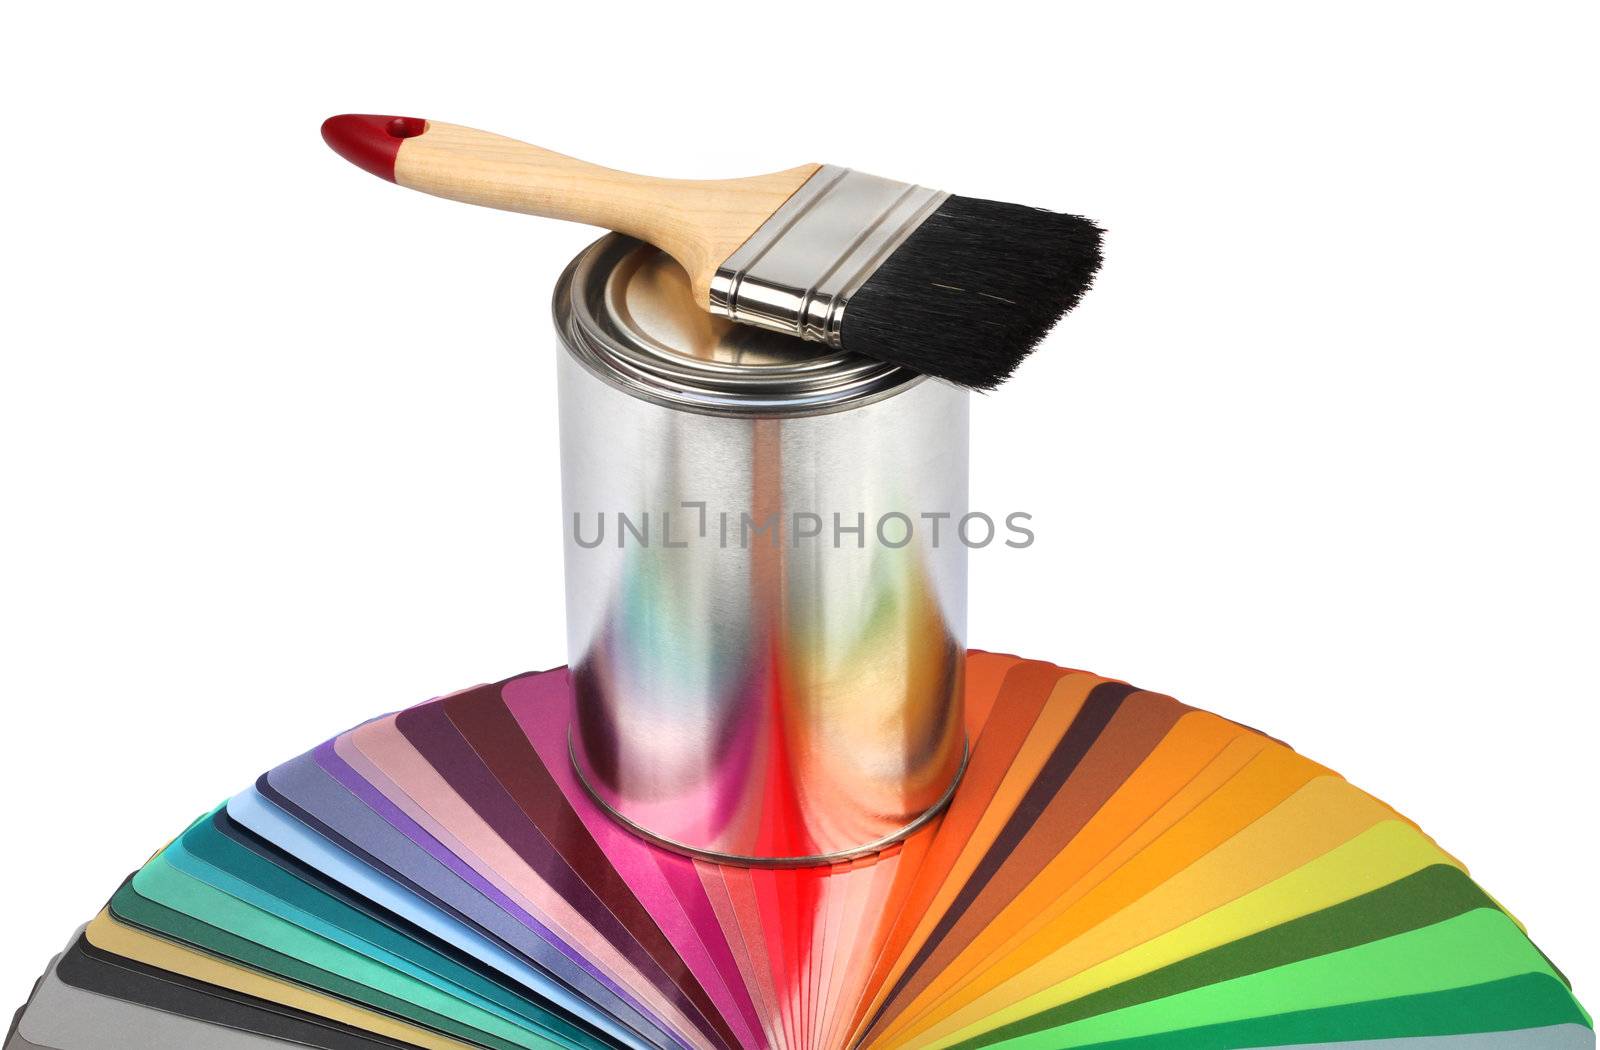 Paint brush and color guide samples by anterovium